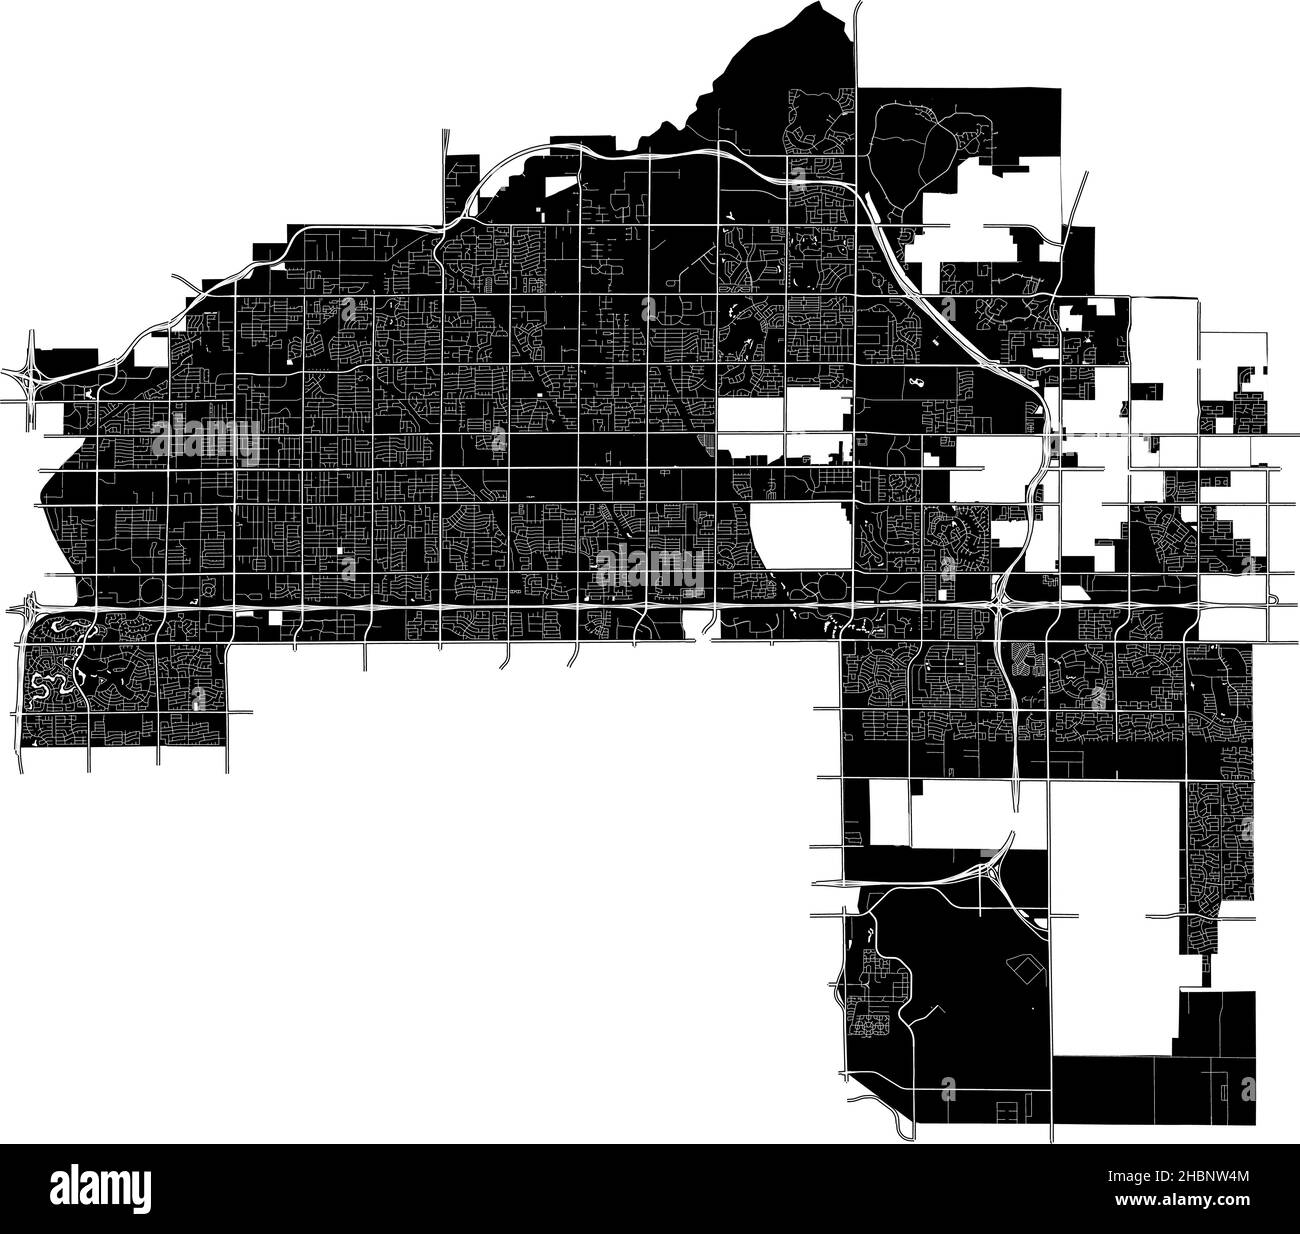 Mesa, Arizona, United States, high resolution vector map with city boundaries, and editable paths. The city map was drawn with white areas and lines f Stock Vector